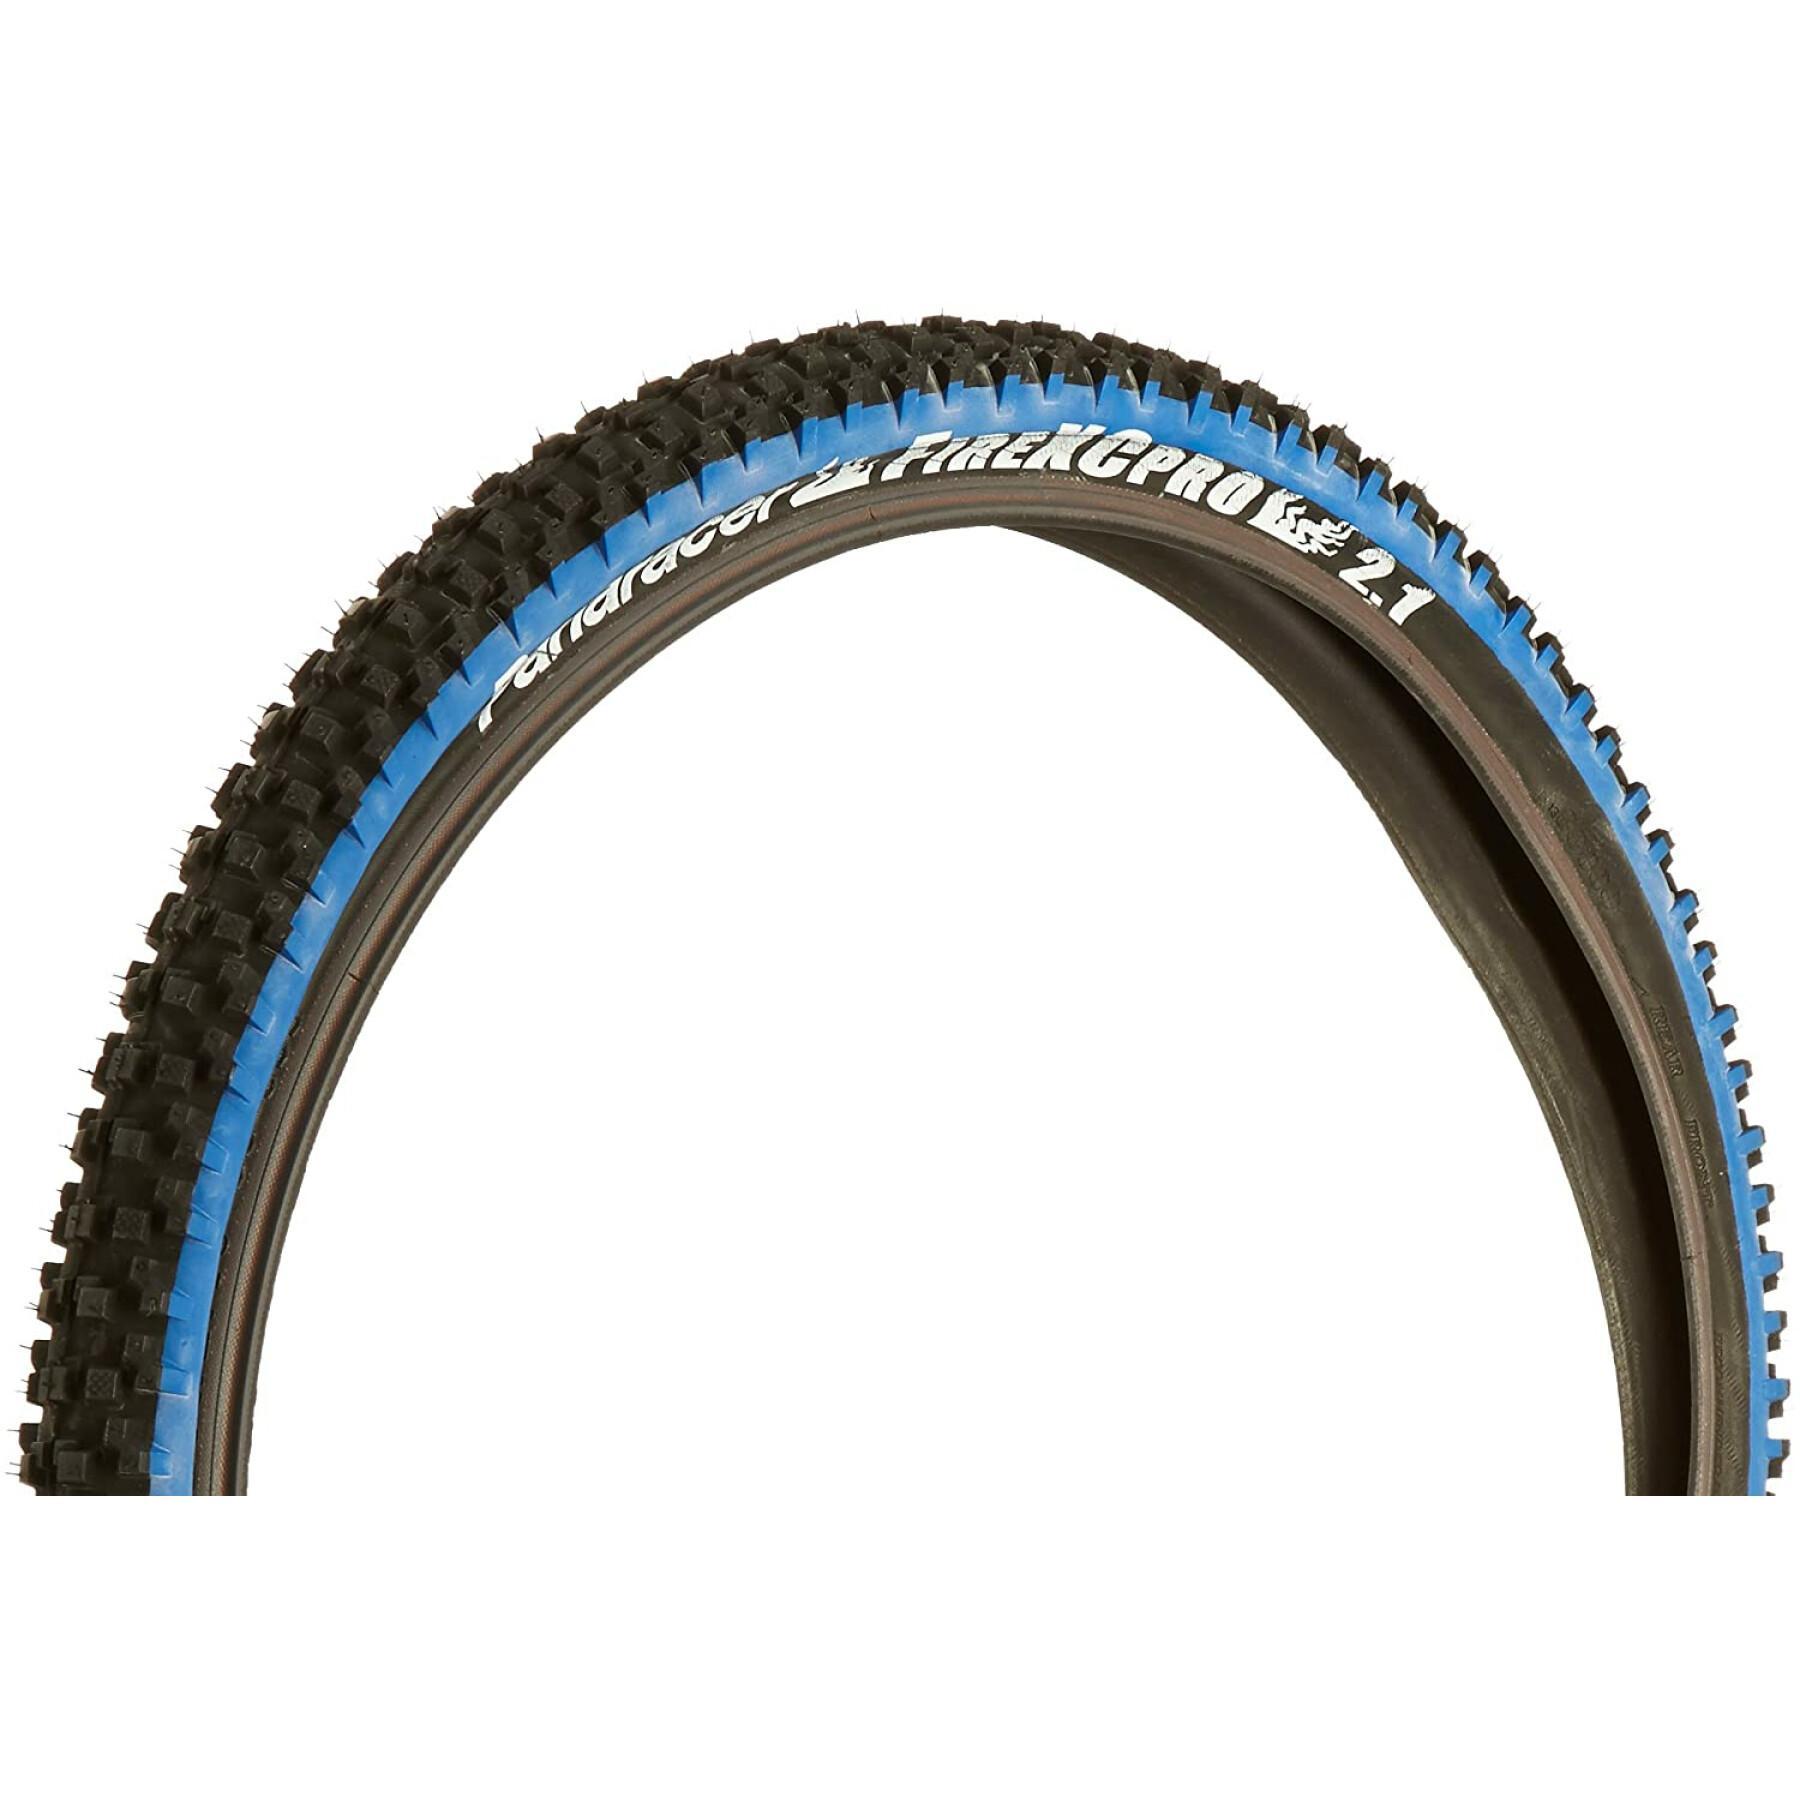 Band Panaracer Fire XC Pro Wire Th